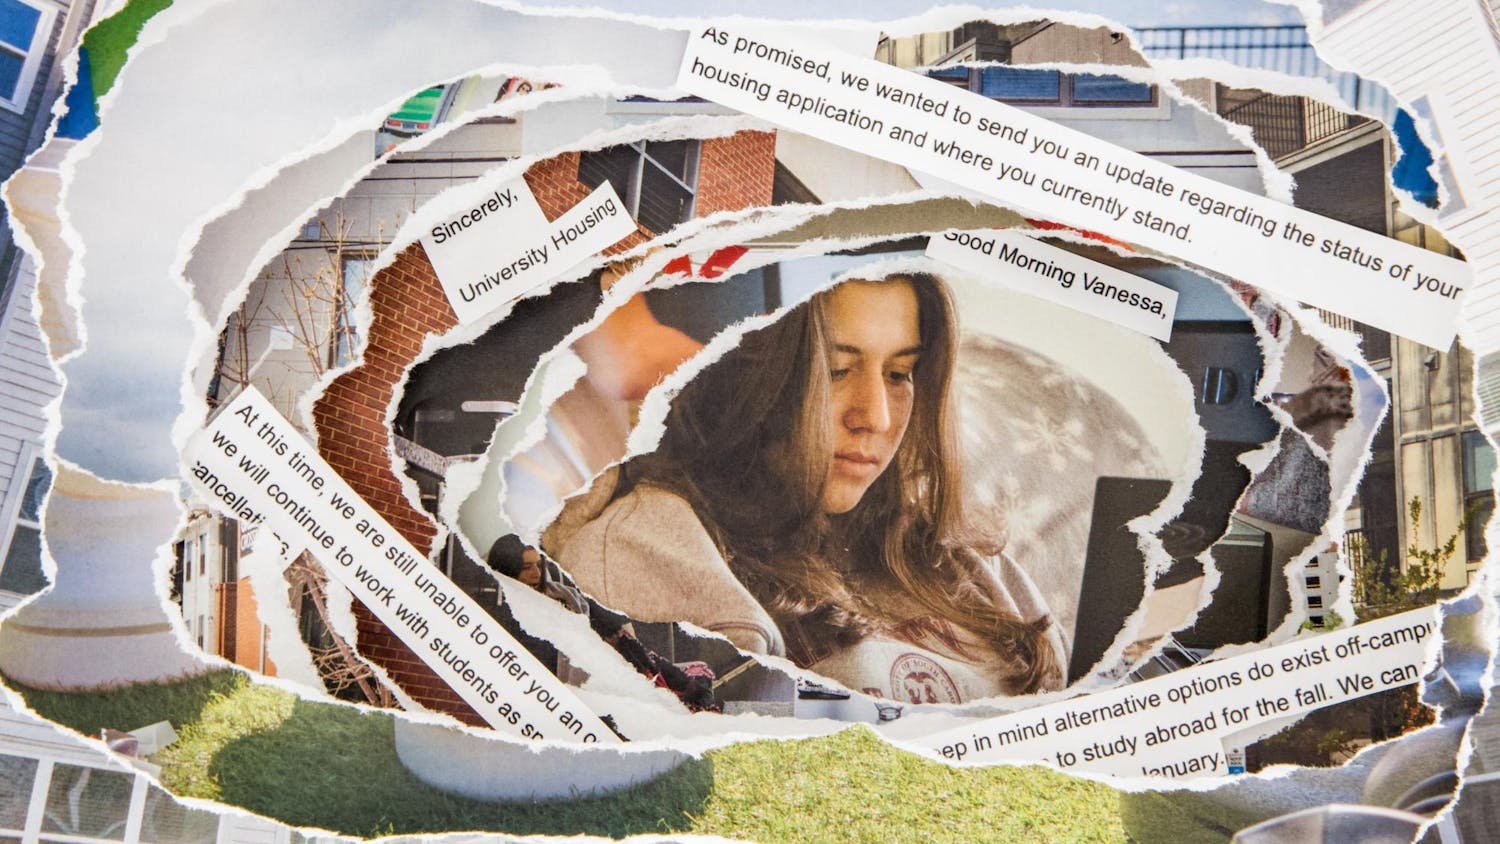 A compilation of photos from different student housing complexes across Columbia, South Carolina throughout the spring 2024 semester. At the center sits Vanessa Alaimo, a resident of 650 Lincoln, surrounded by clips of emails sent to her by the University of South Carolina housing office.